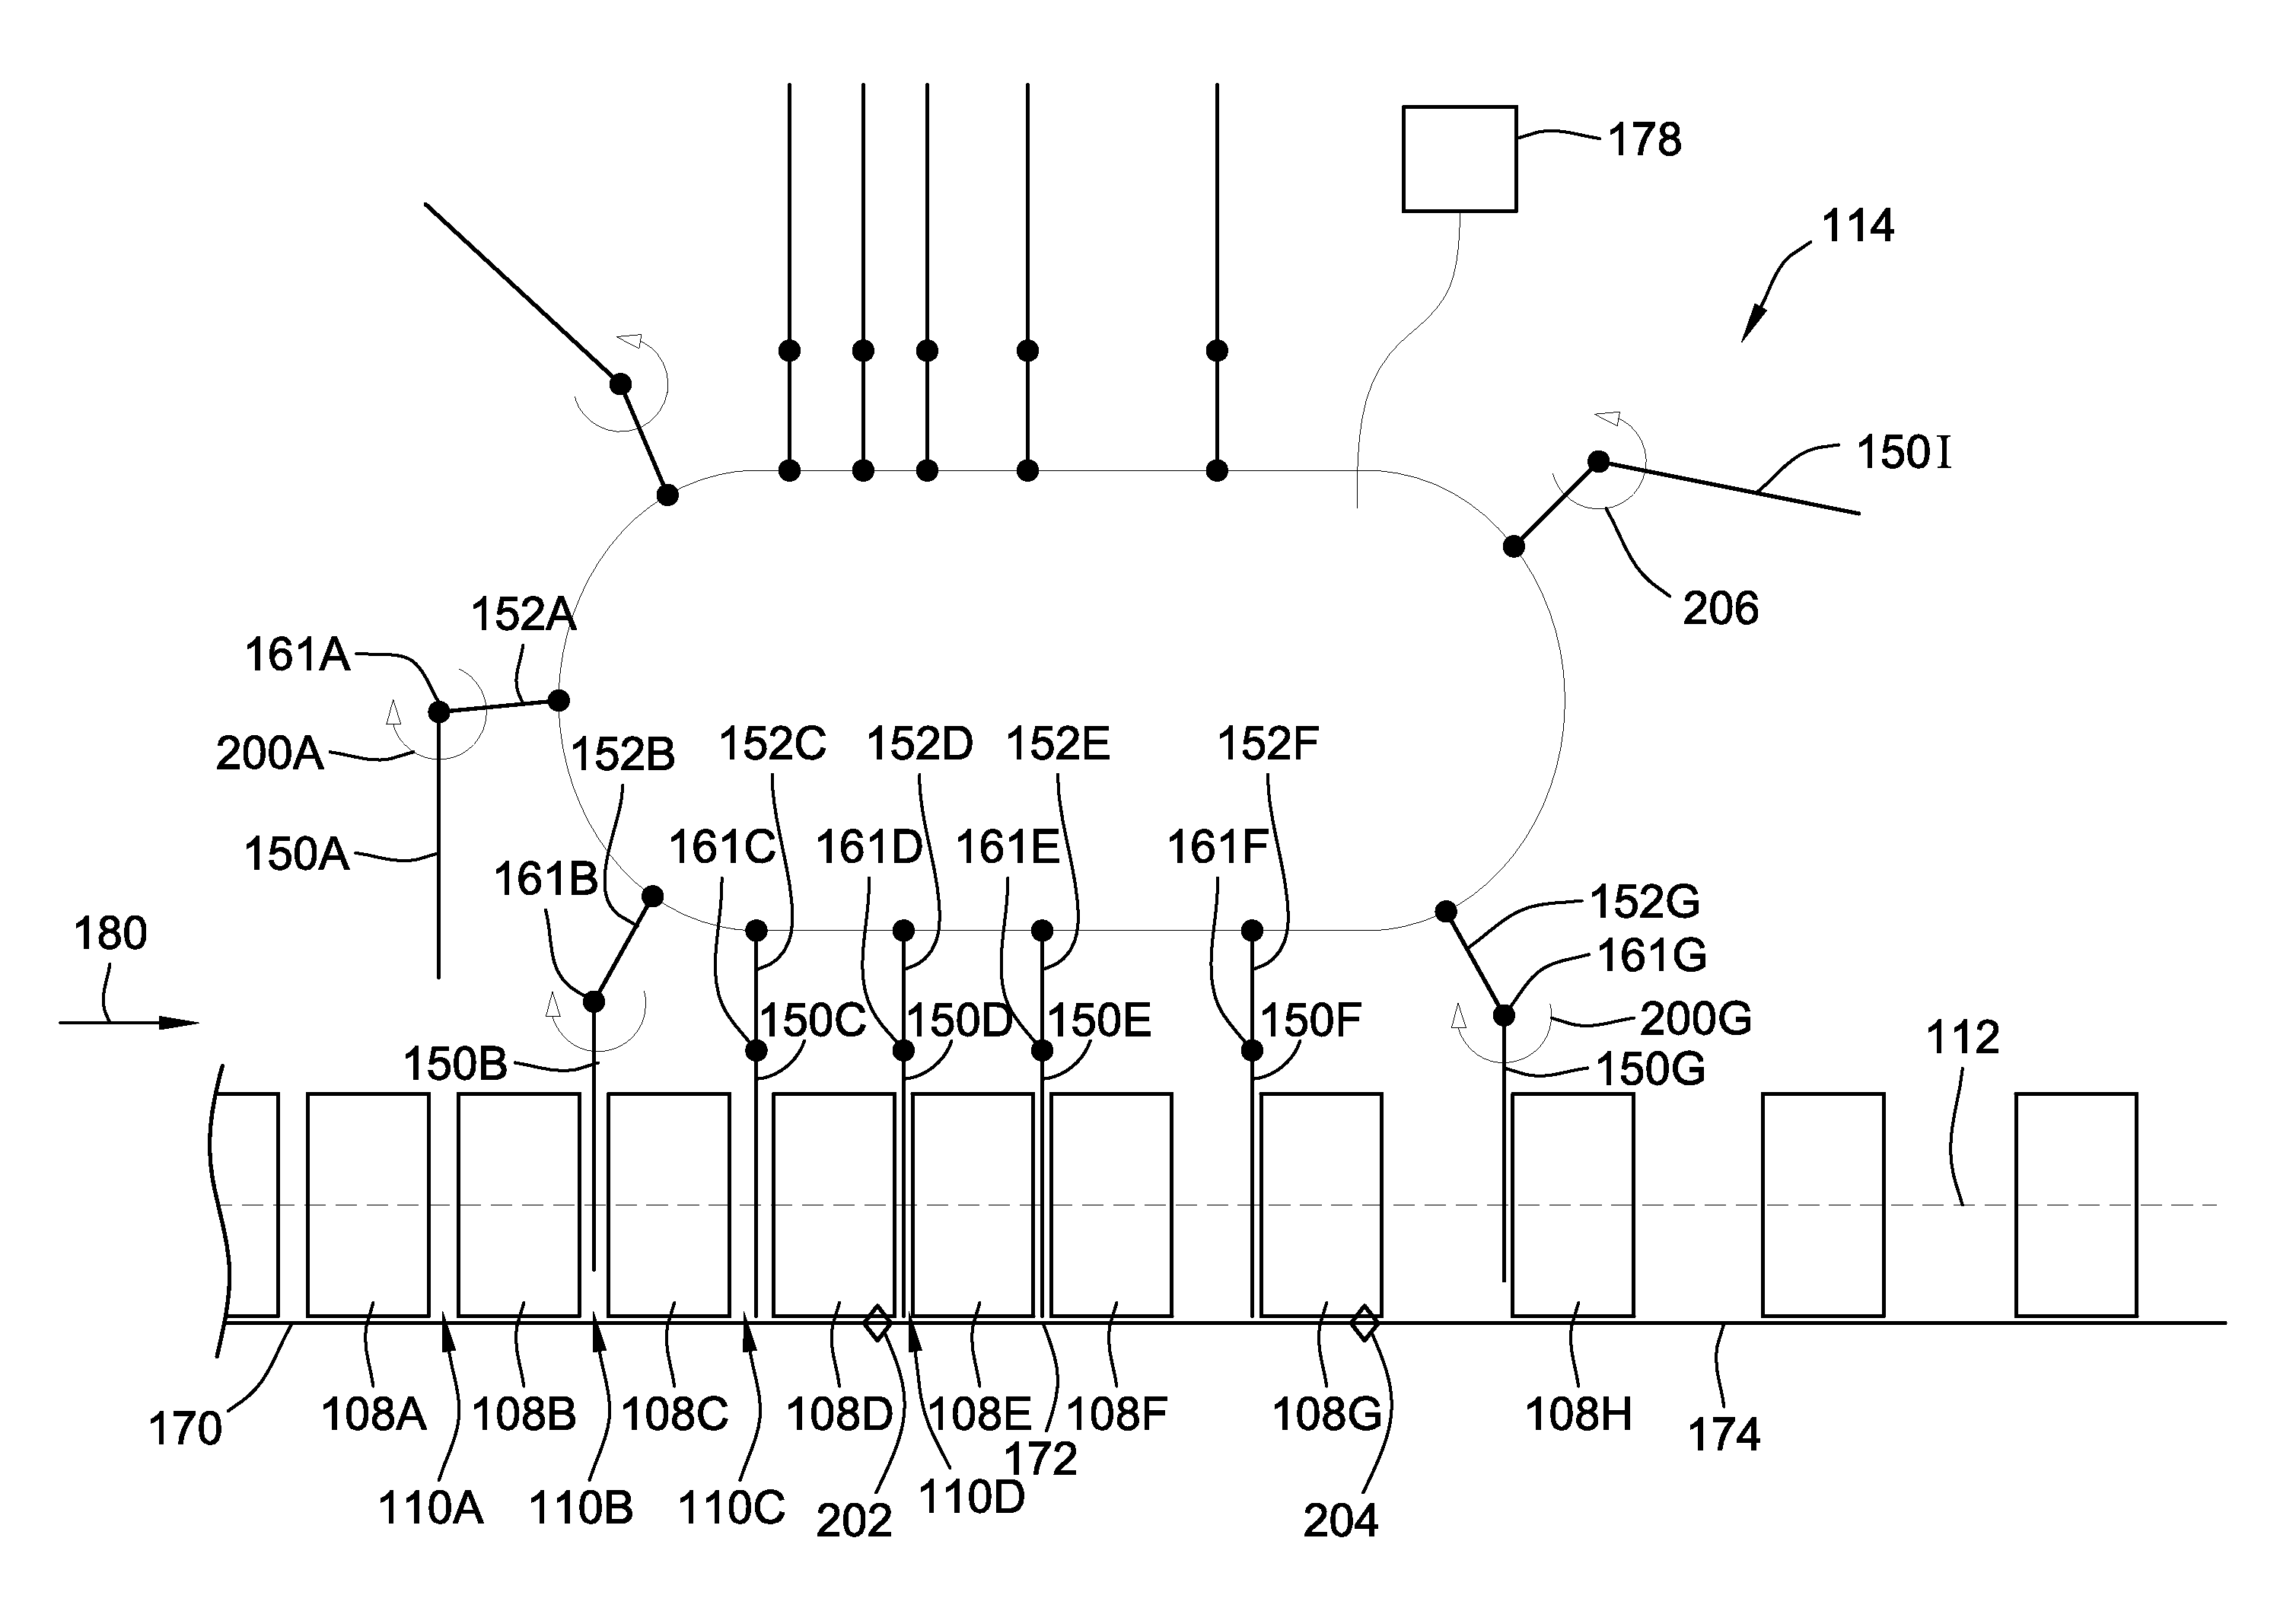 Pack alignment apparatus and methods using linear motor